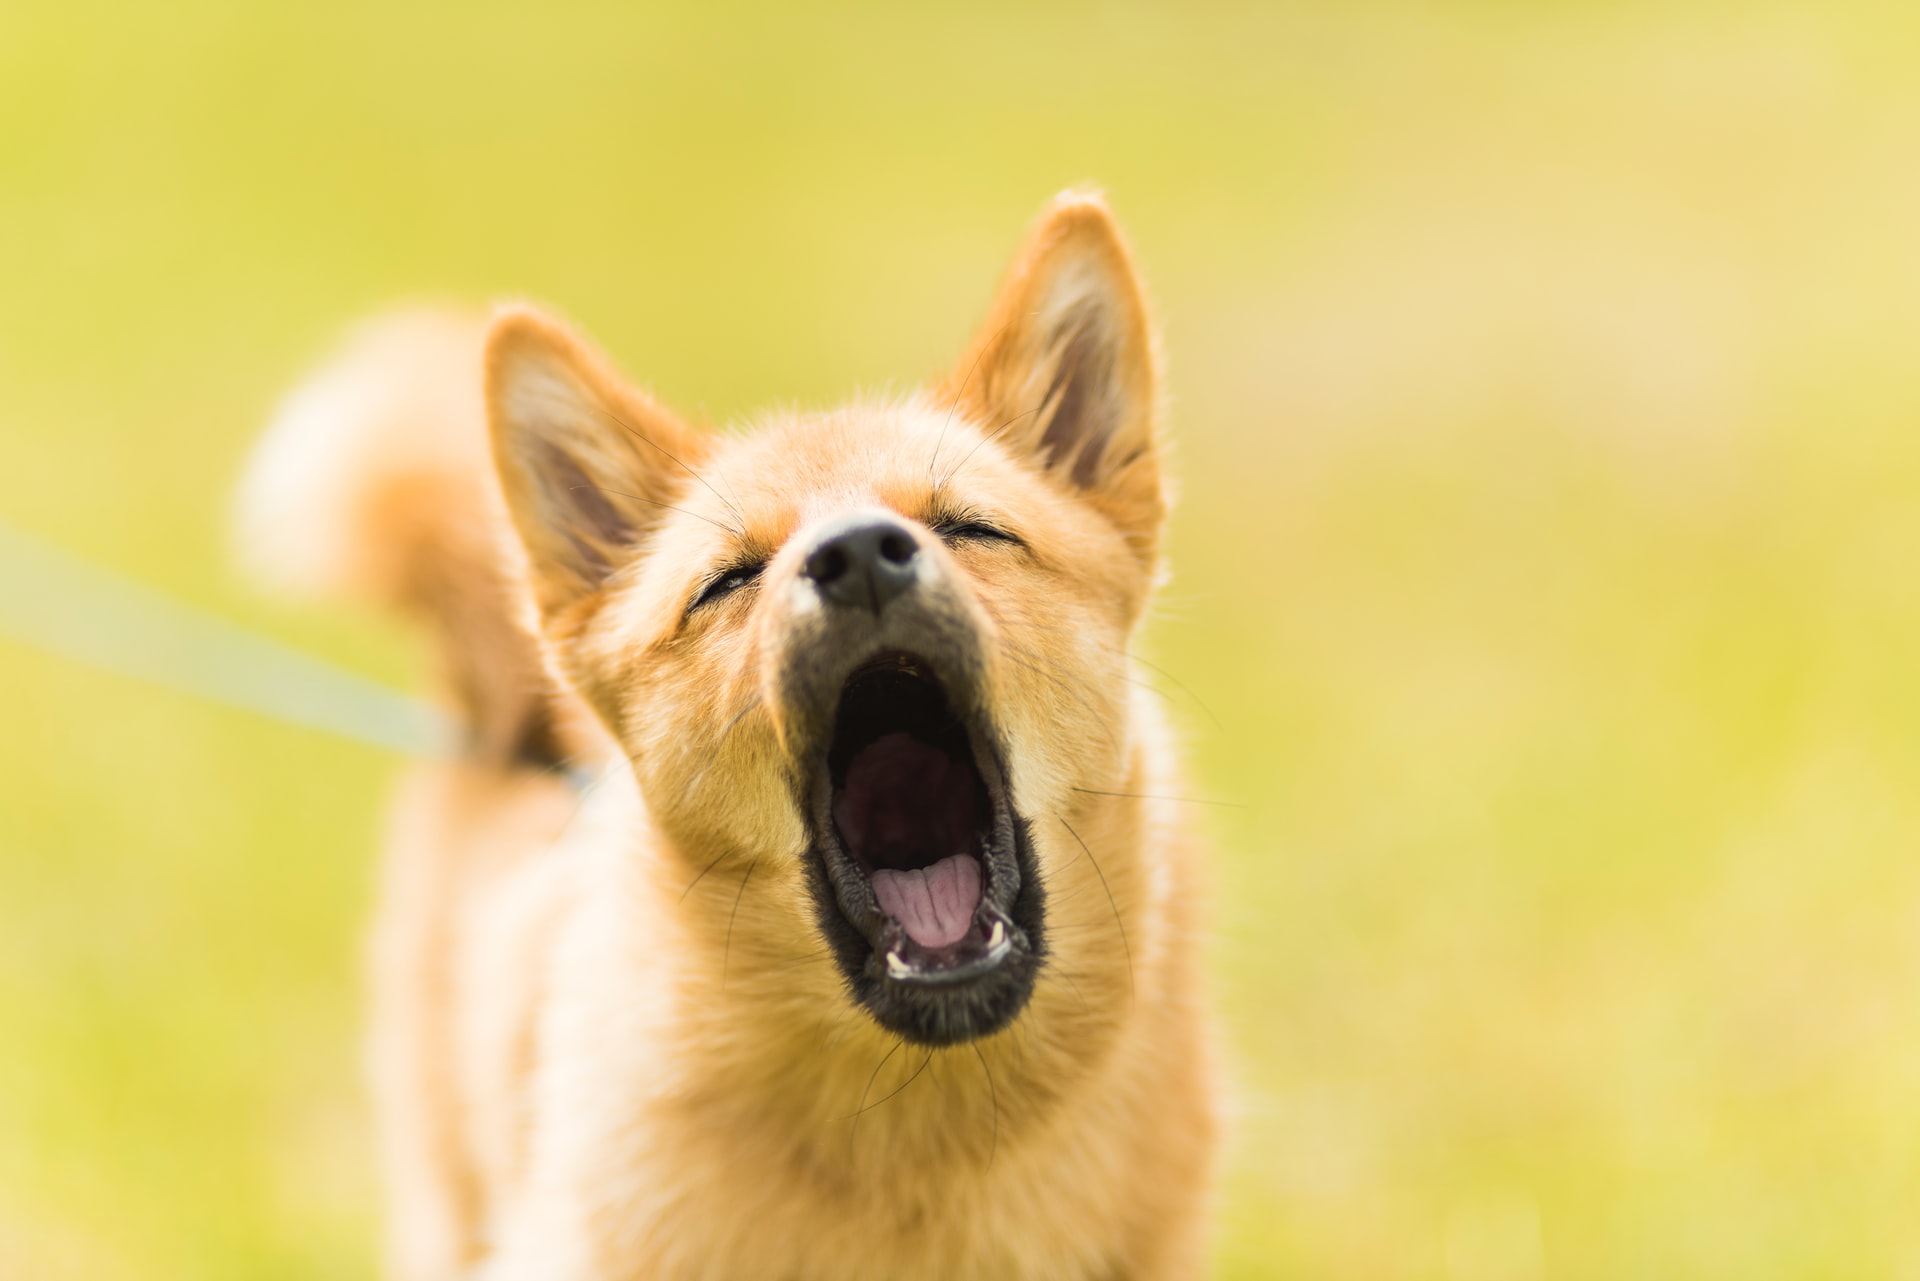 Everything You Need to Know About Dog Bites